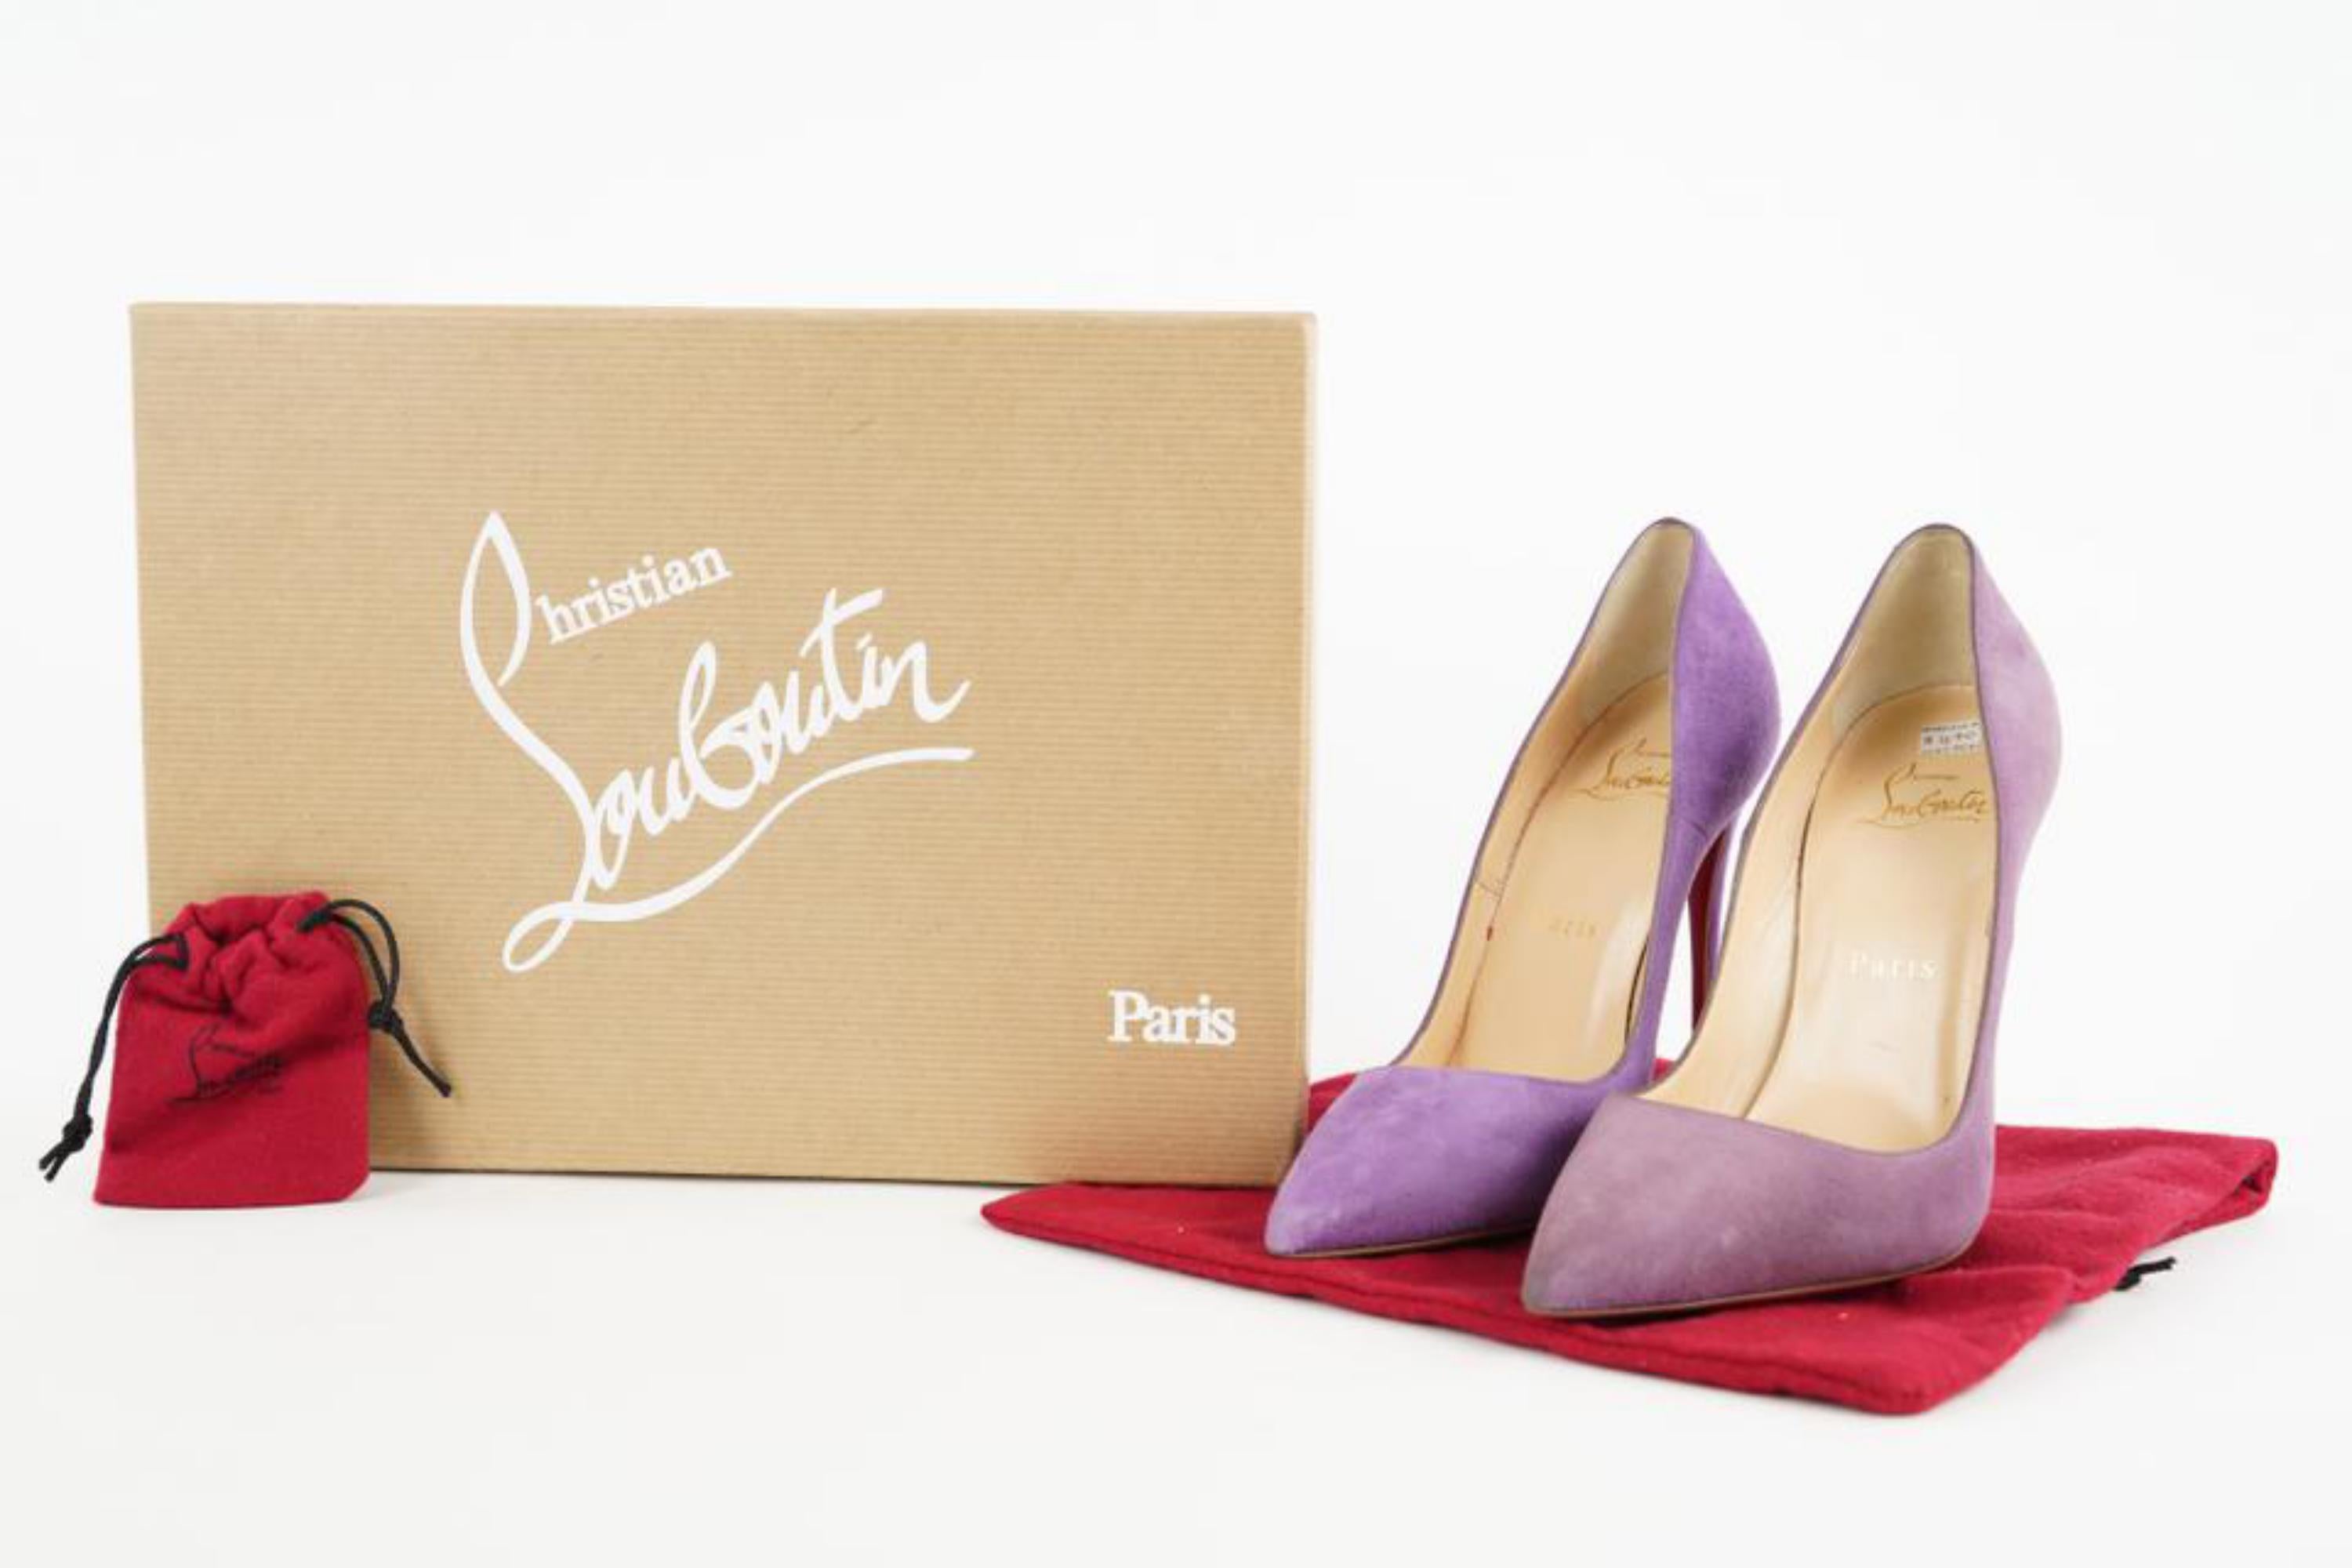 Christian Louboutin 36 Purple Suede So Kate Red Bottom Heels 1CL330
Made In: Italy
Measurements: Length:  9